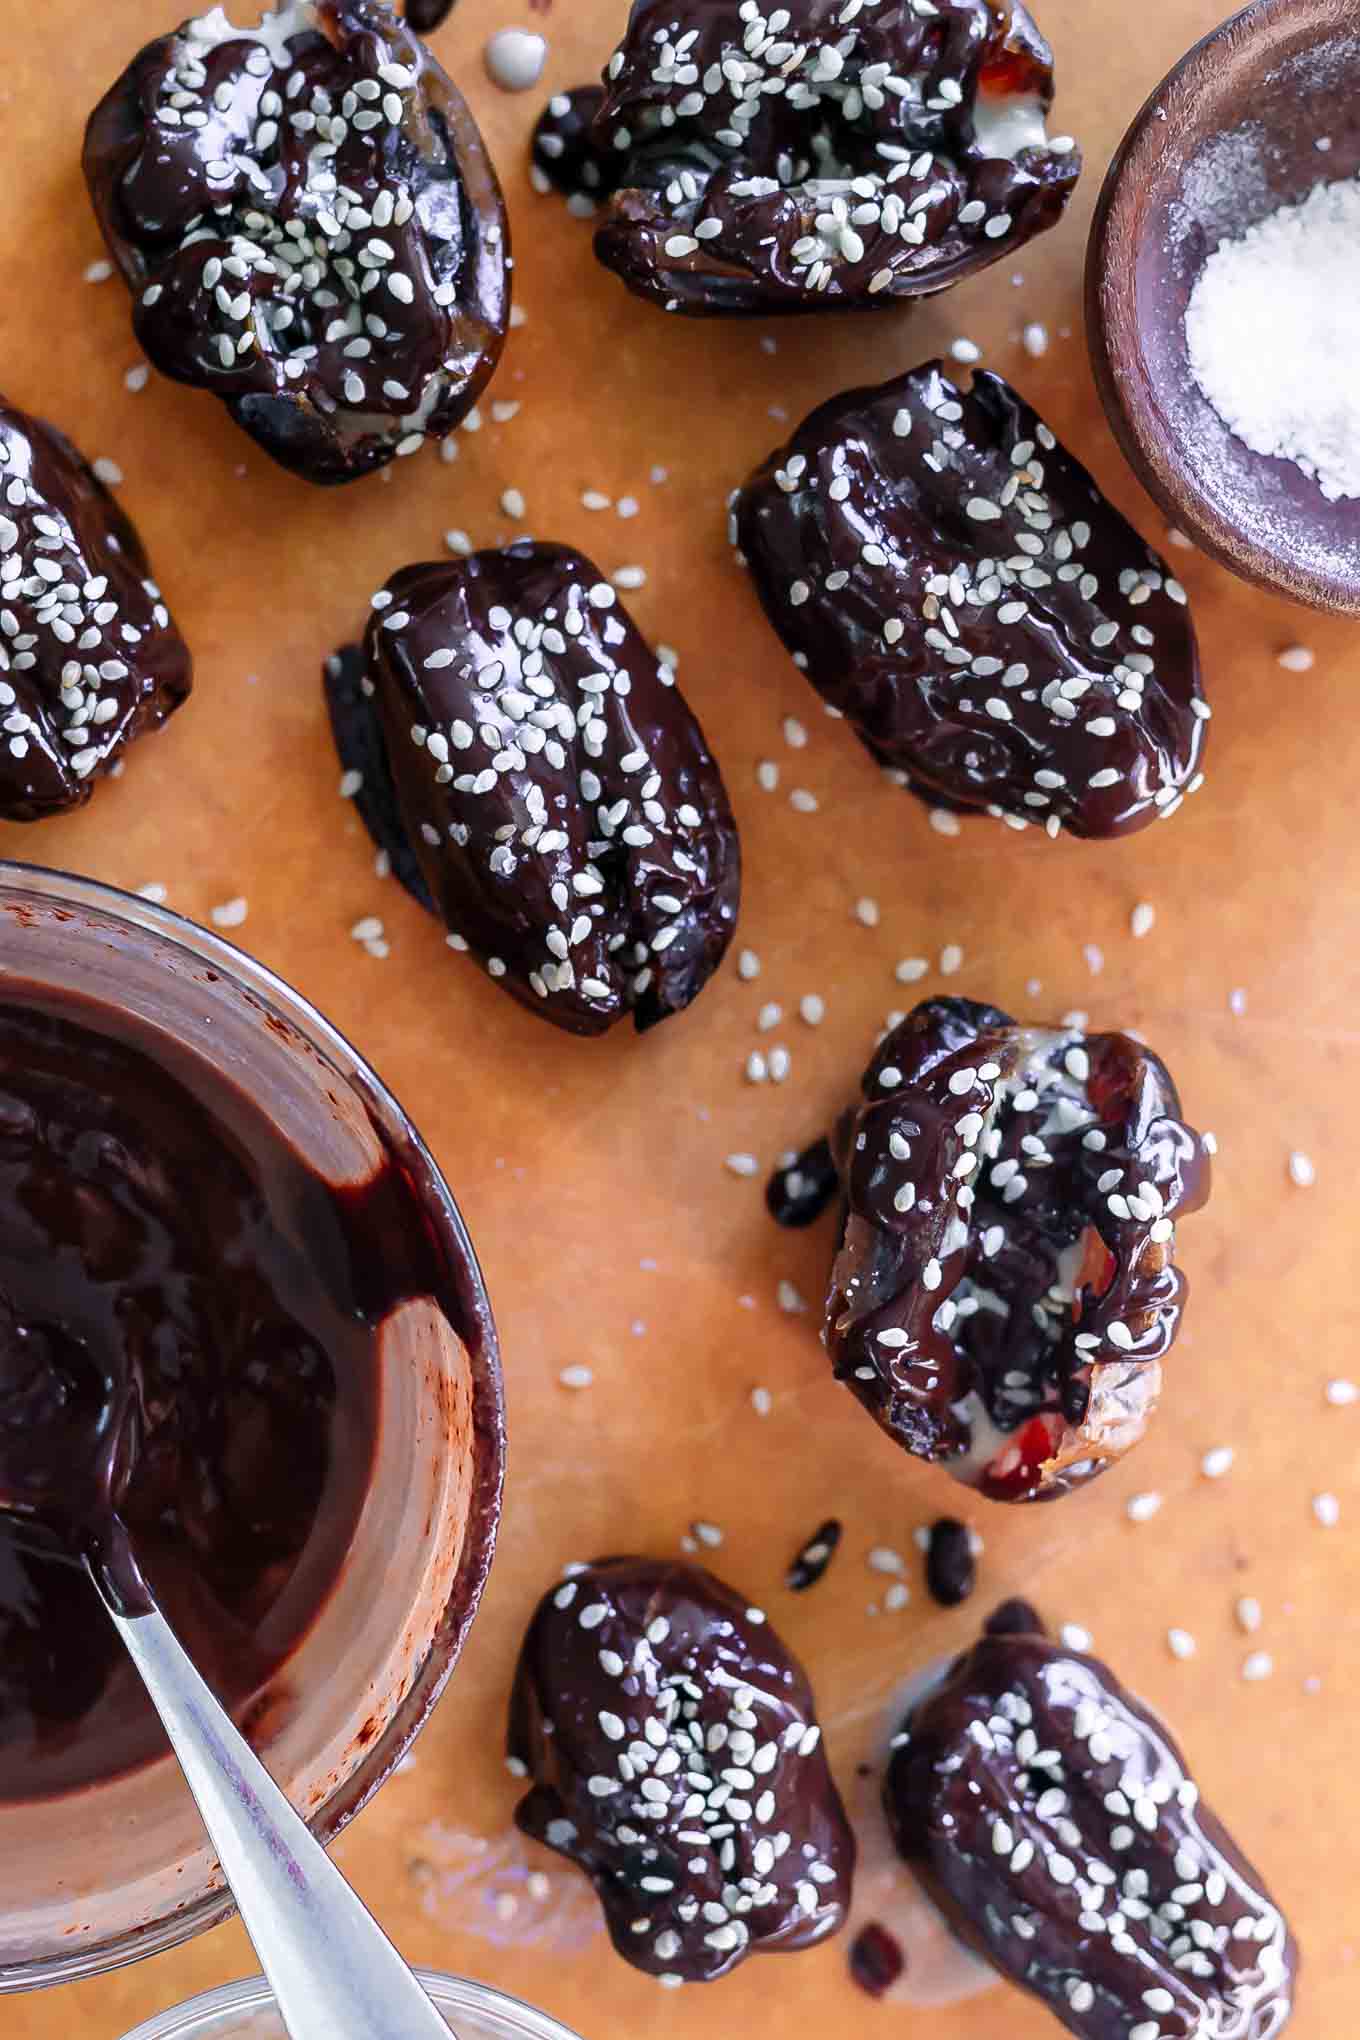 tahini dates with melted chocolate on a wood cutting board